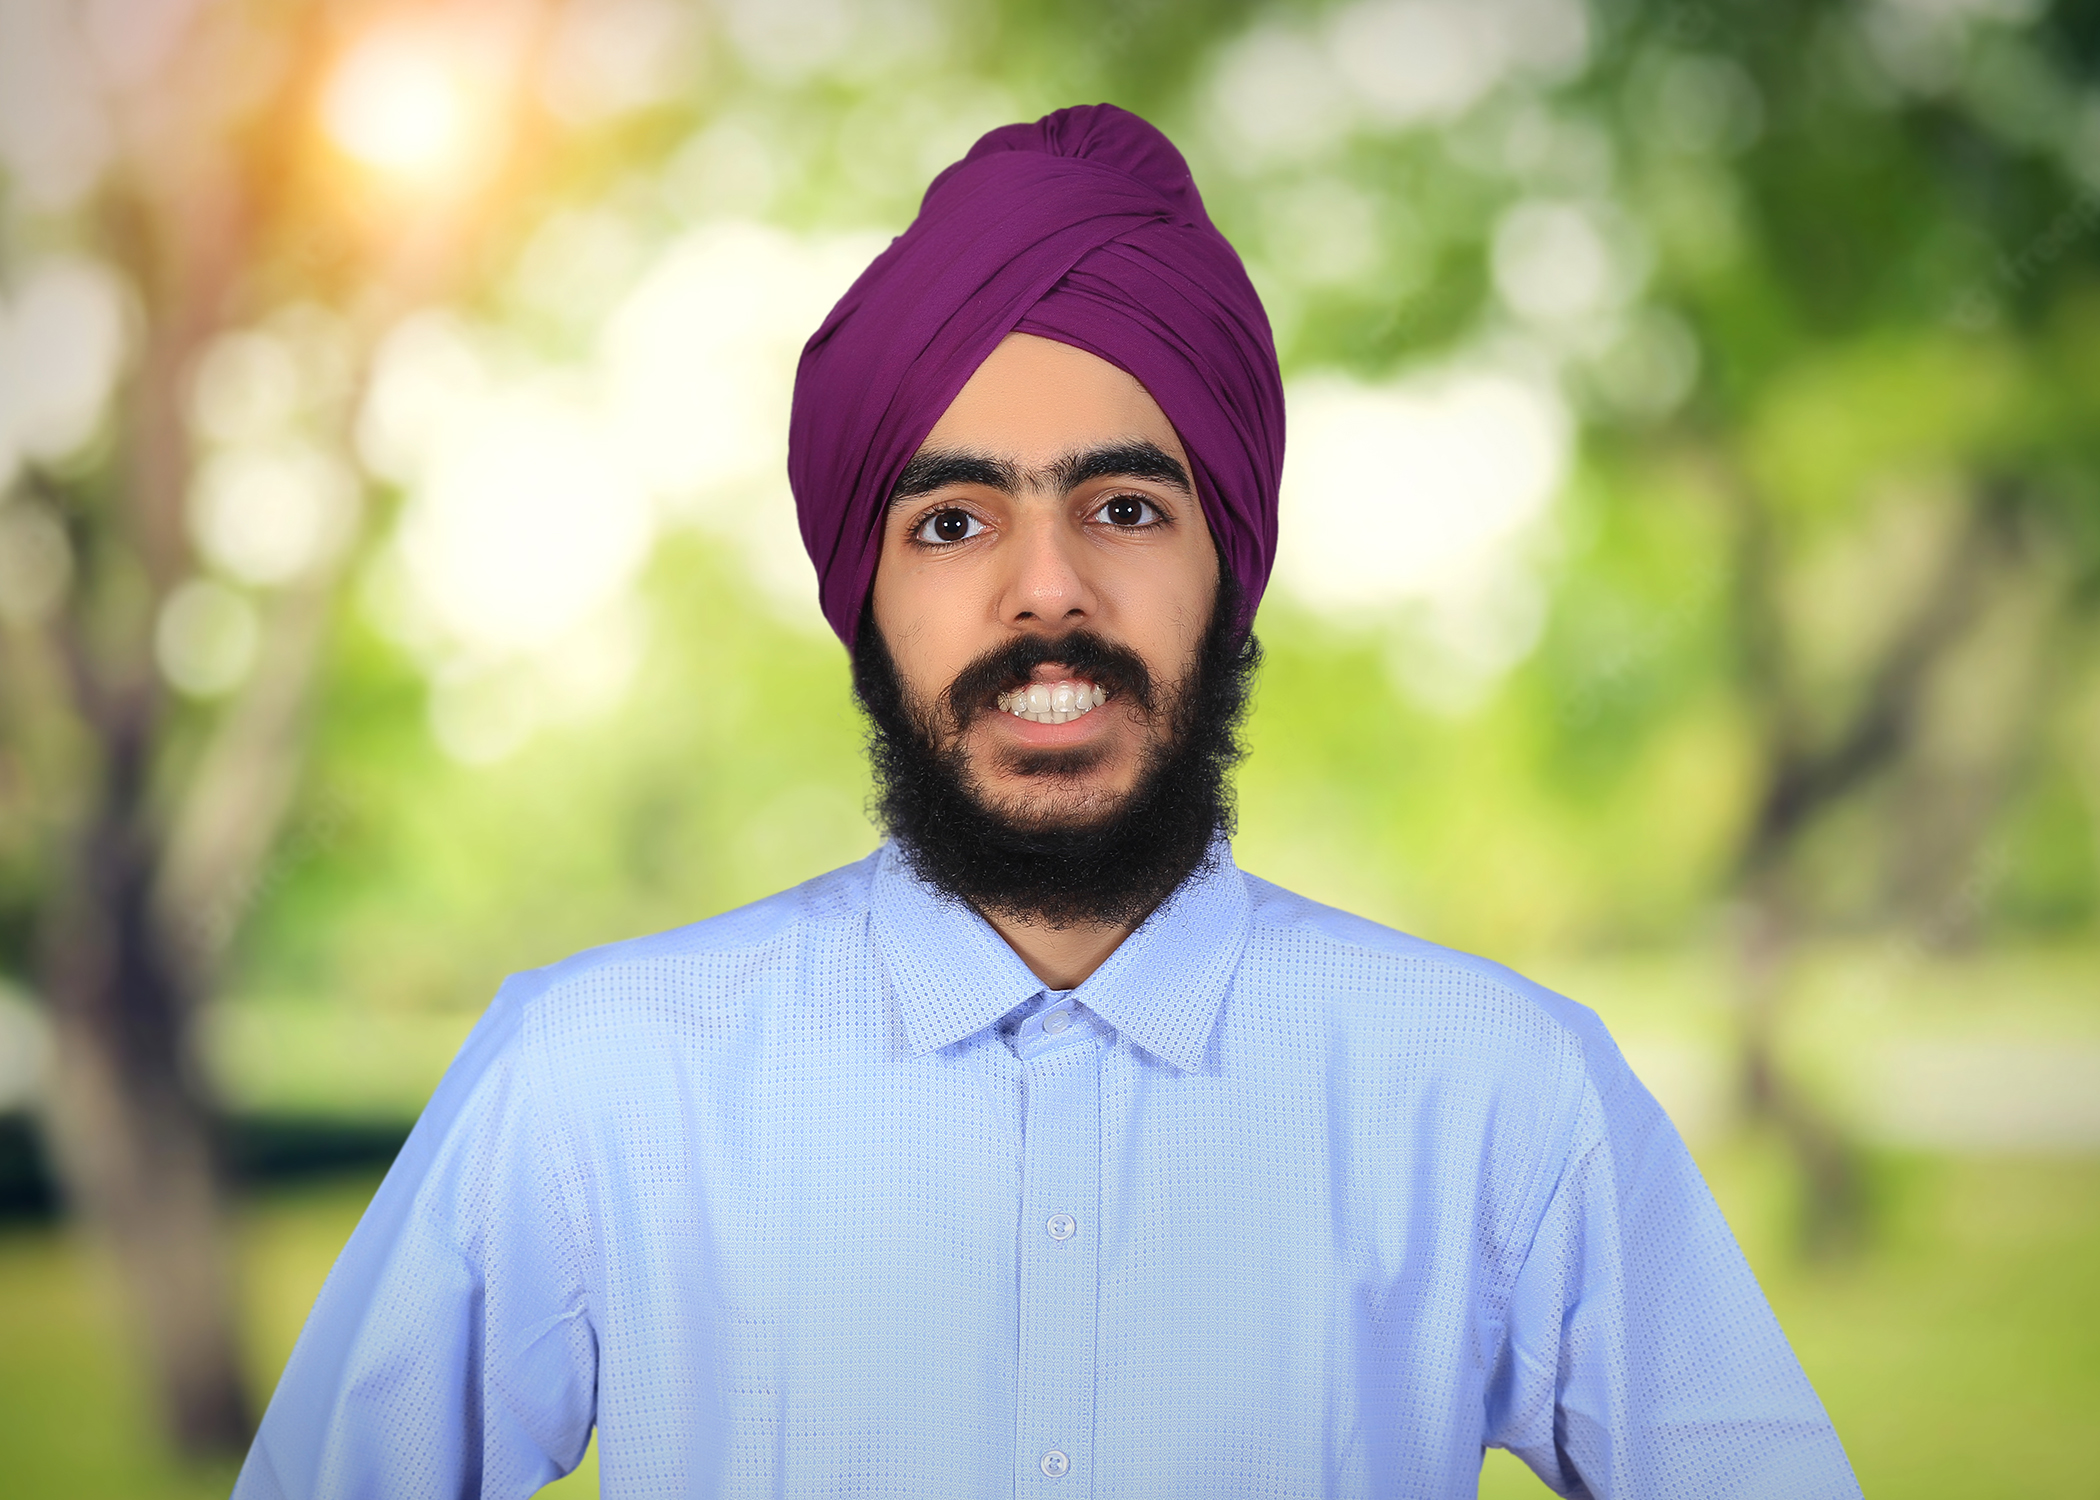 A portrait of a young man in a beard, turban and collared shirt